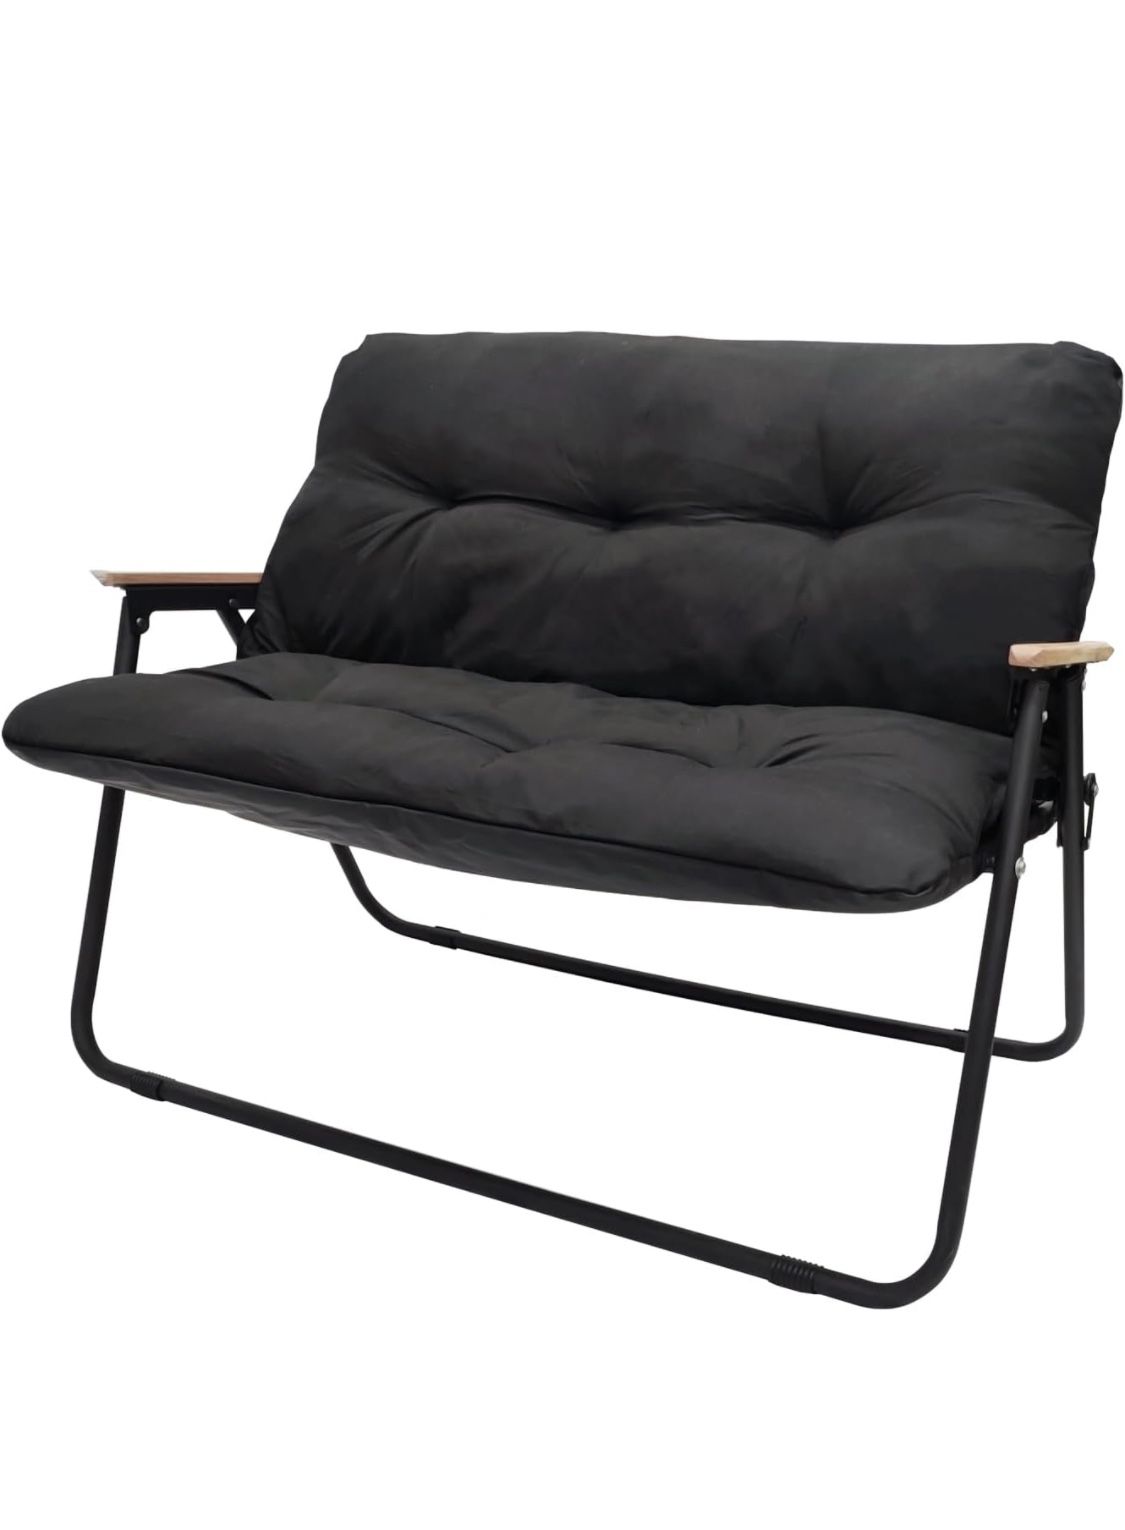 New Loveseat Camping Chair With Cushion 